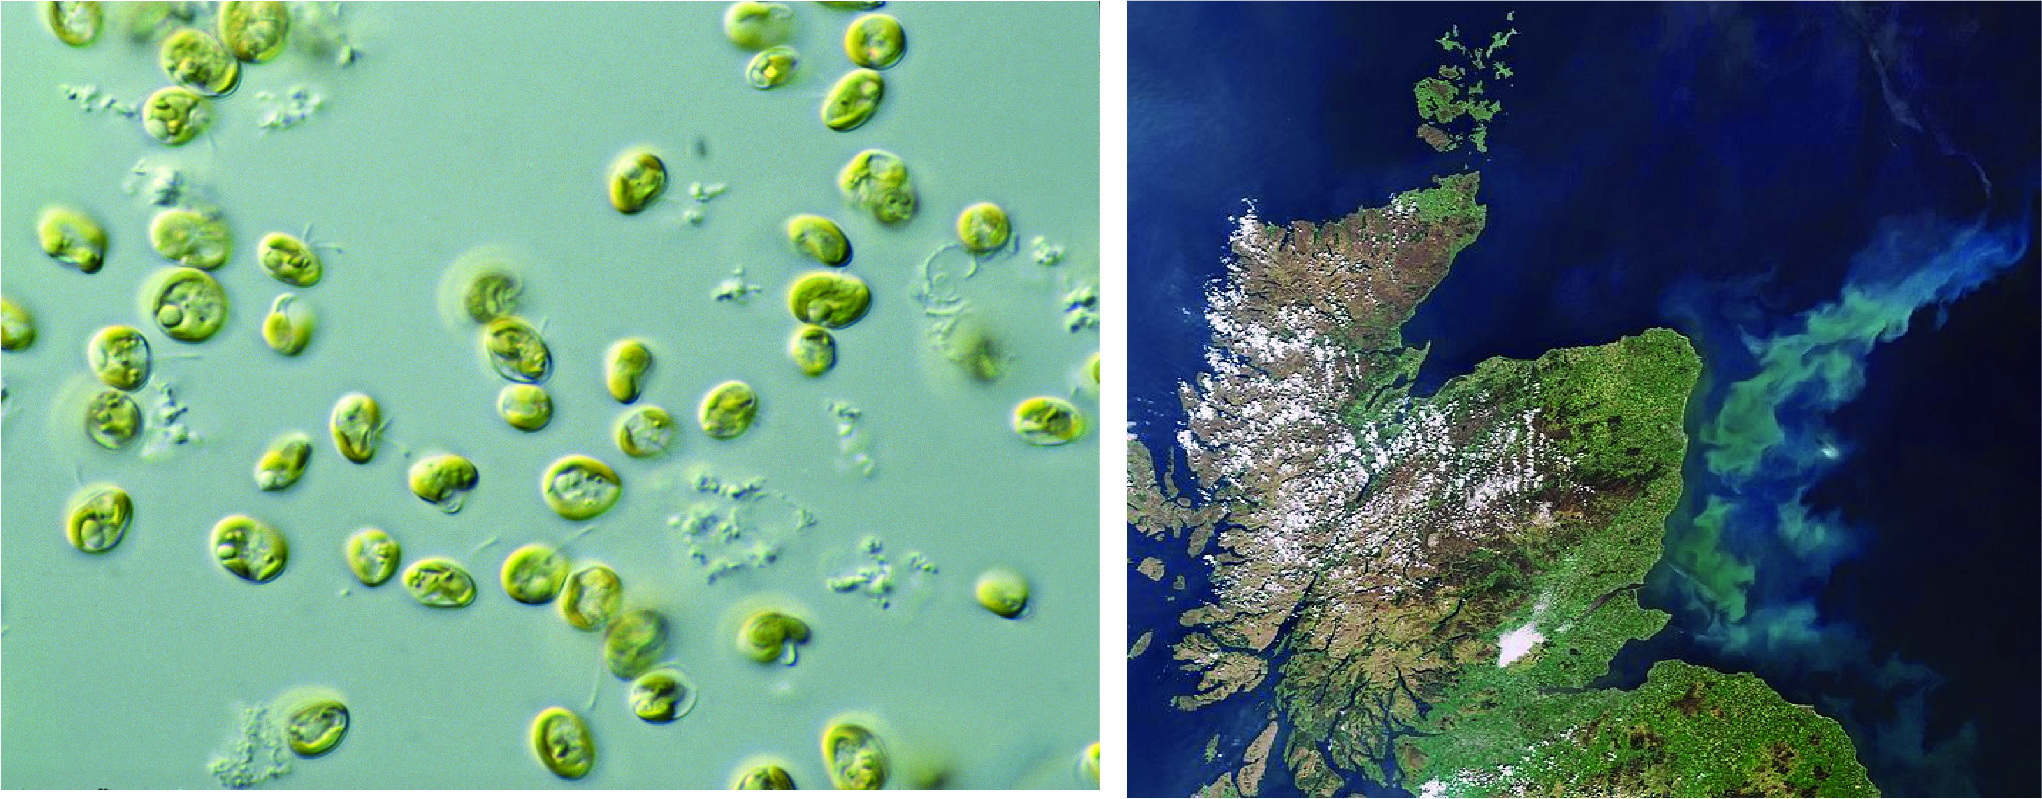 Photographic image of green phytoplankton cells under high magnification and a satellite image of a phytoplankton bloom off the east coast of Scotland.